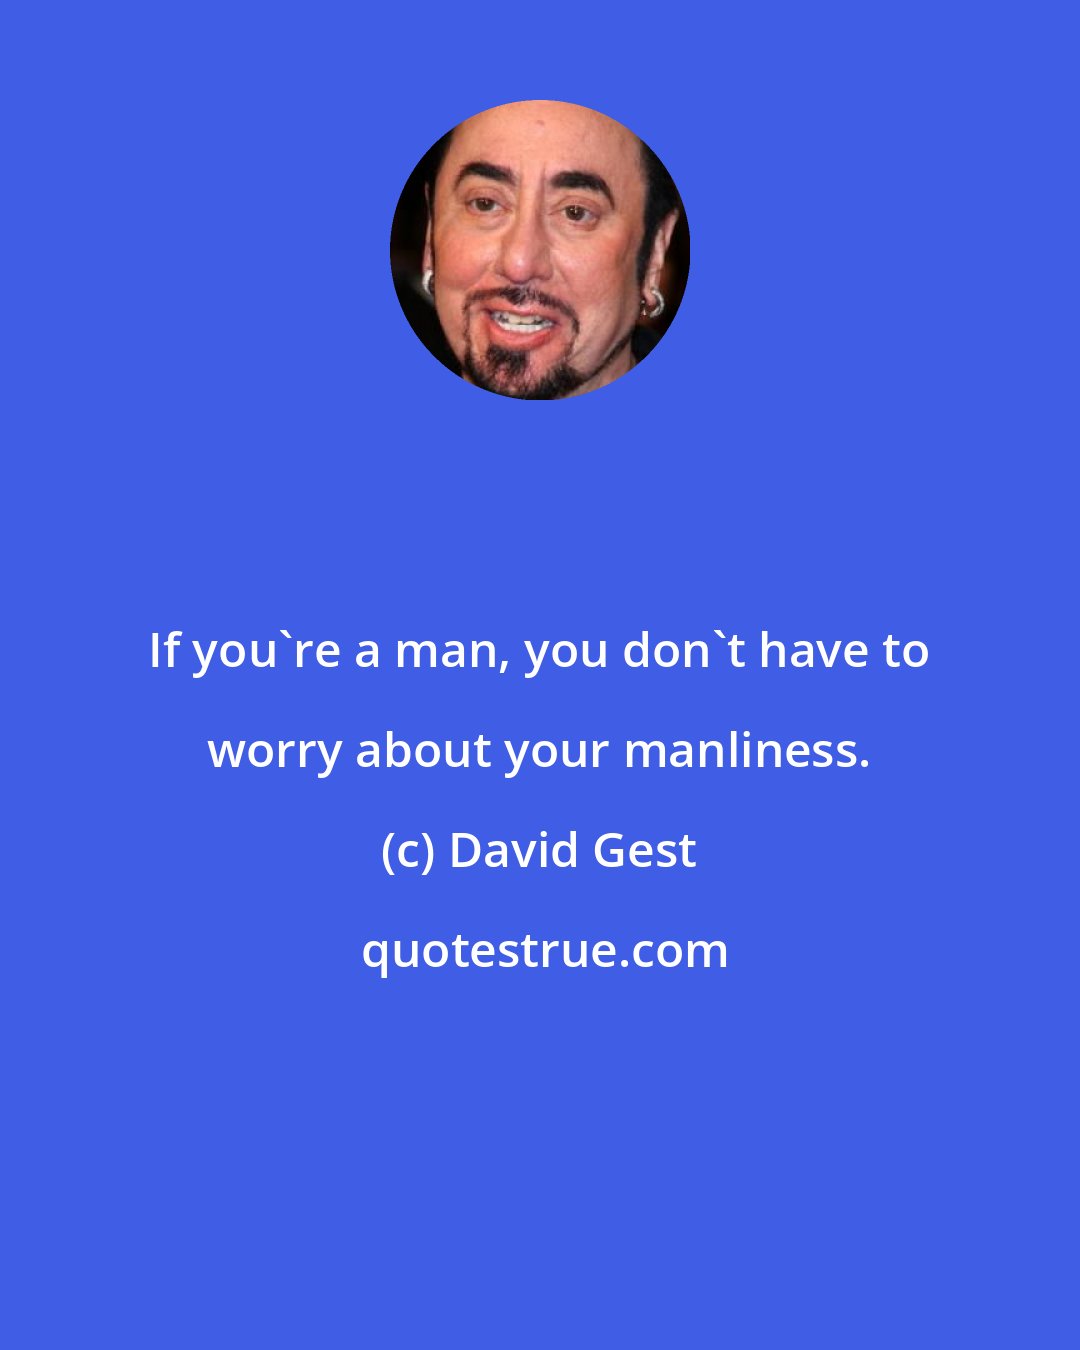 David Gest: If you're a man, you don't have to worry about your manliness.